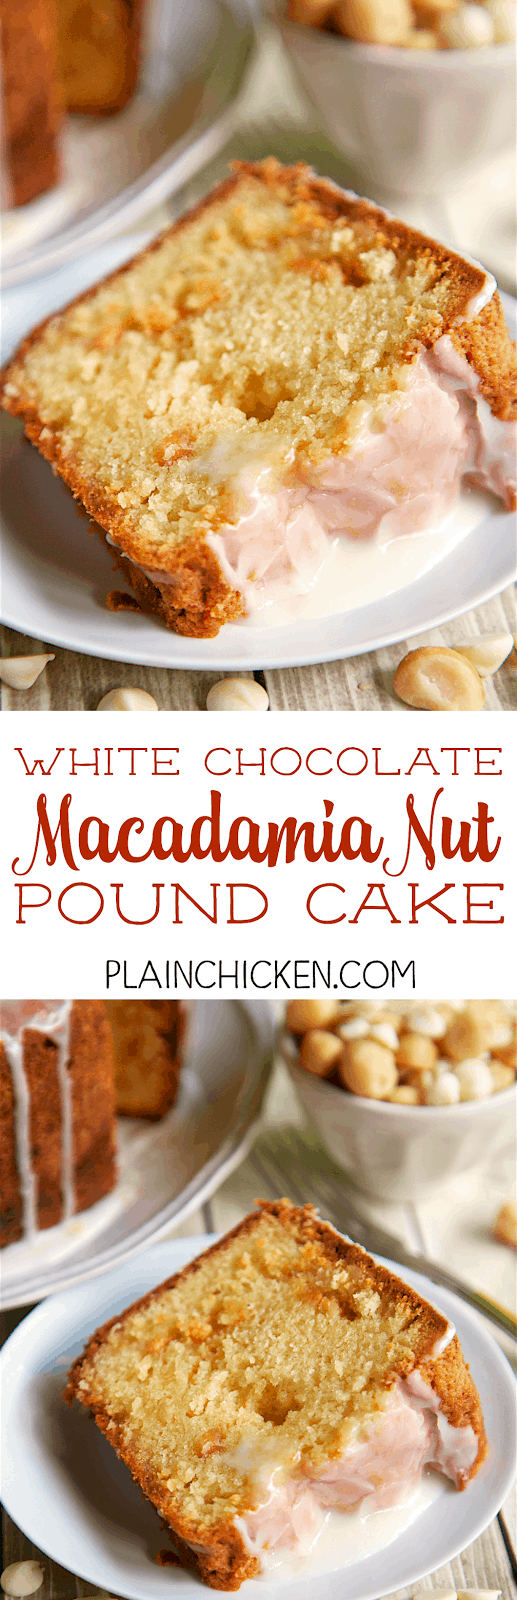 White Chocolate Macadamia Nut Pound Cake - DELICIOUS! An easy from scratch pound cake. Flour, sugar, butter, eggs, vanilla, white chocolate pudding, macadamia nuts, pineapple juice. Cake is drizzled with a quick pineapple glaze. This is CRAZY good!!! This didn't last long in our house! Great for a potluck or homemade gift.